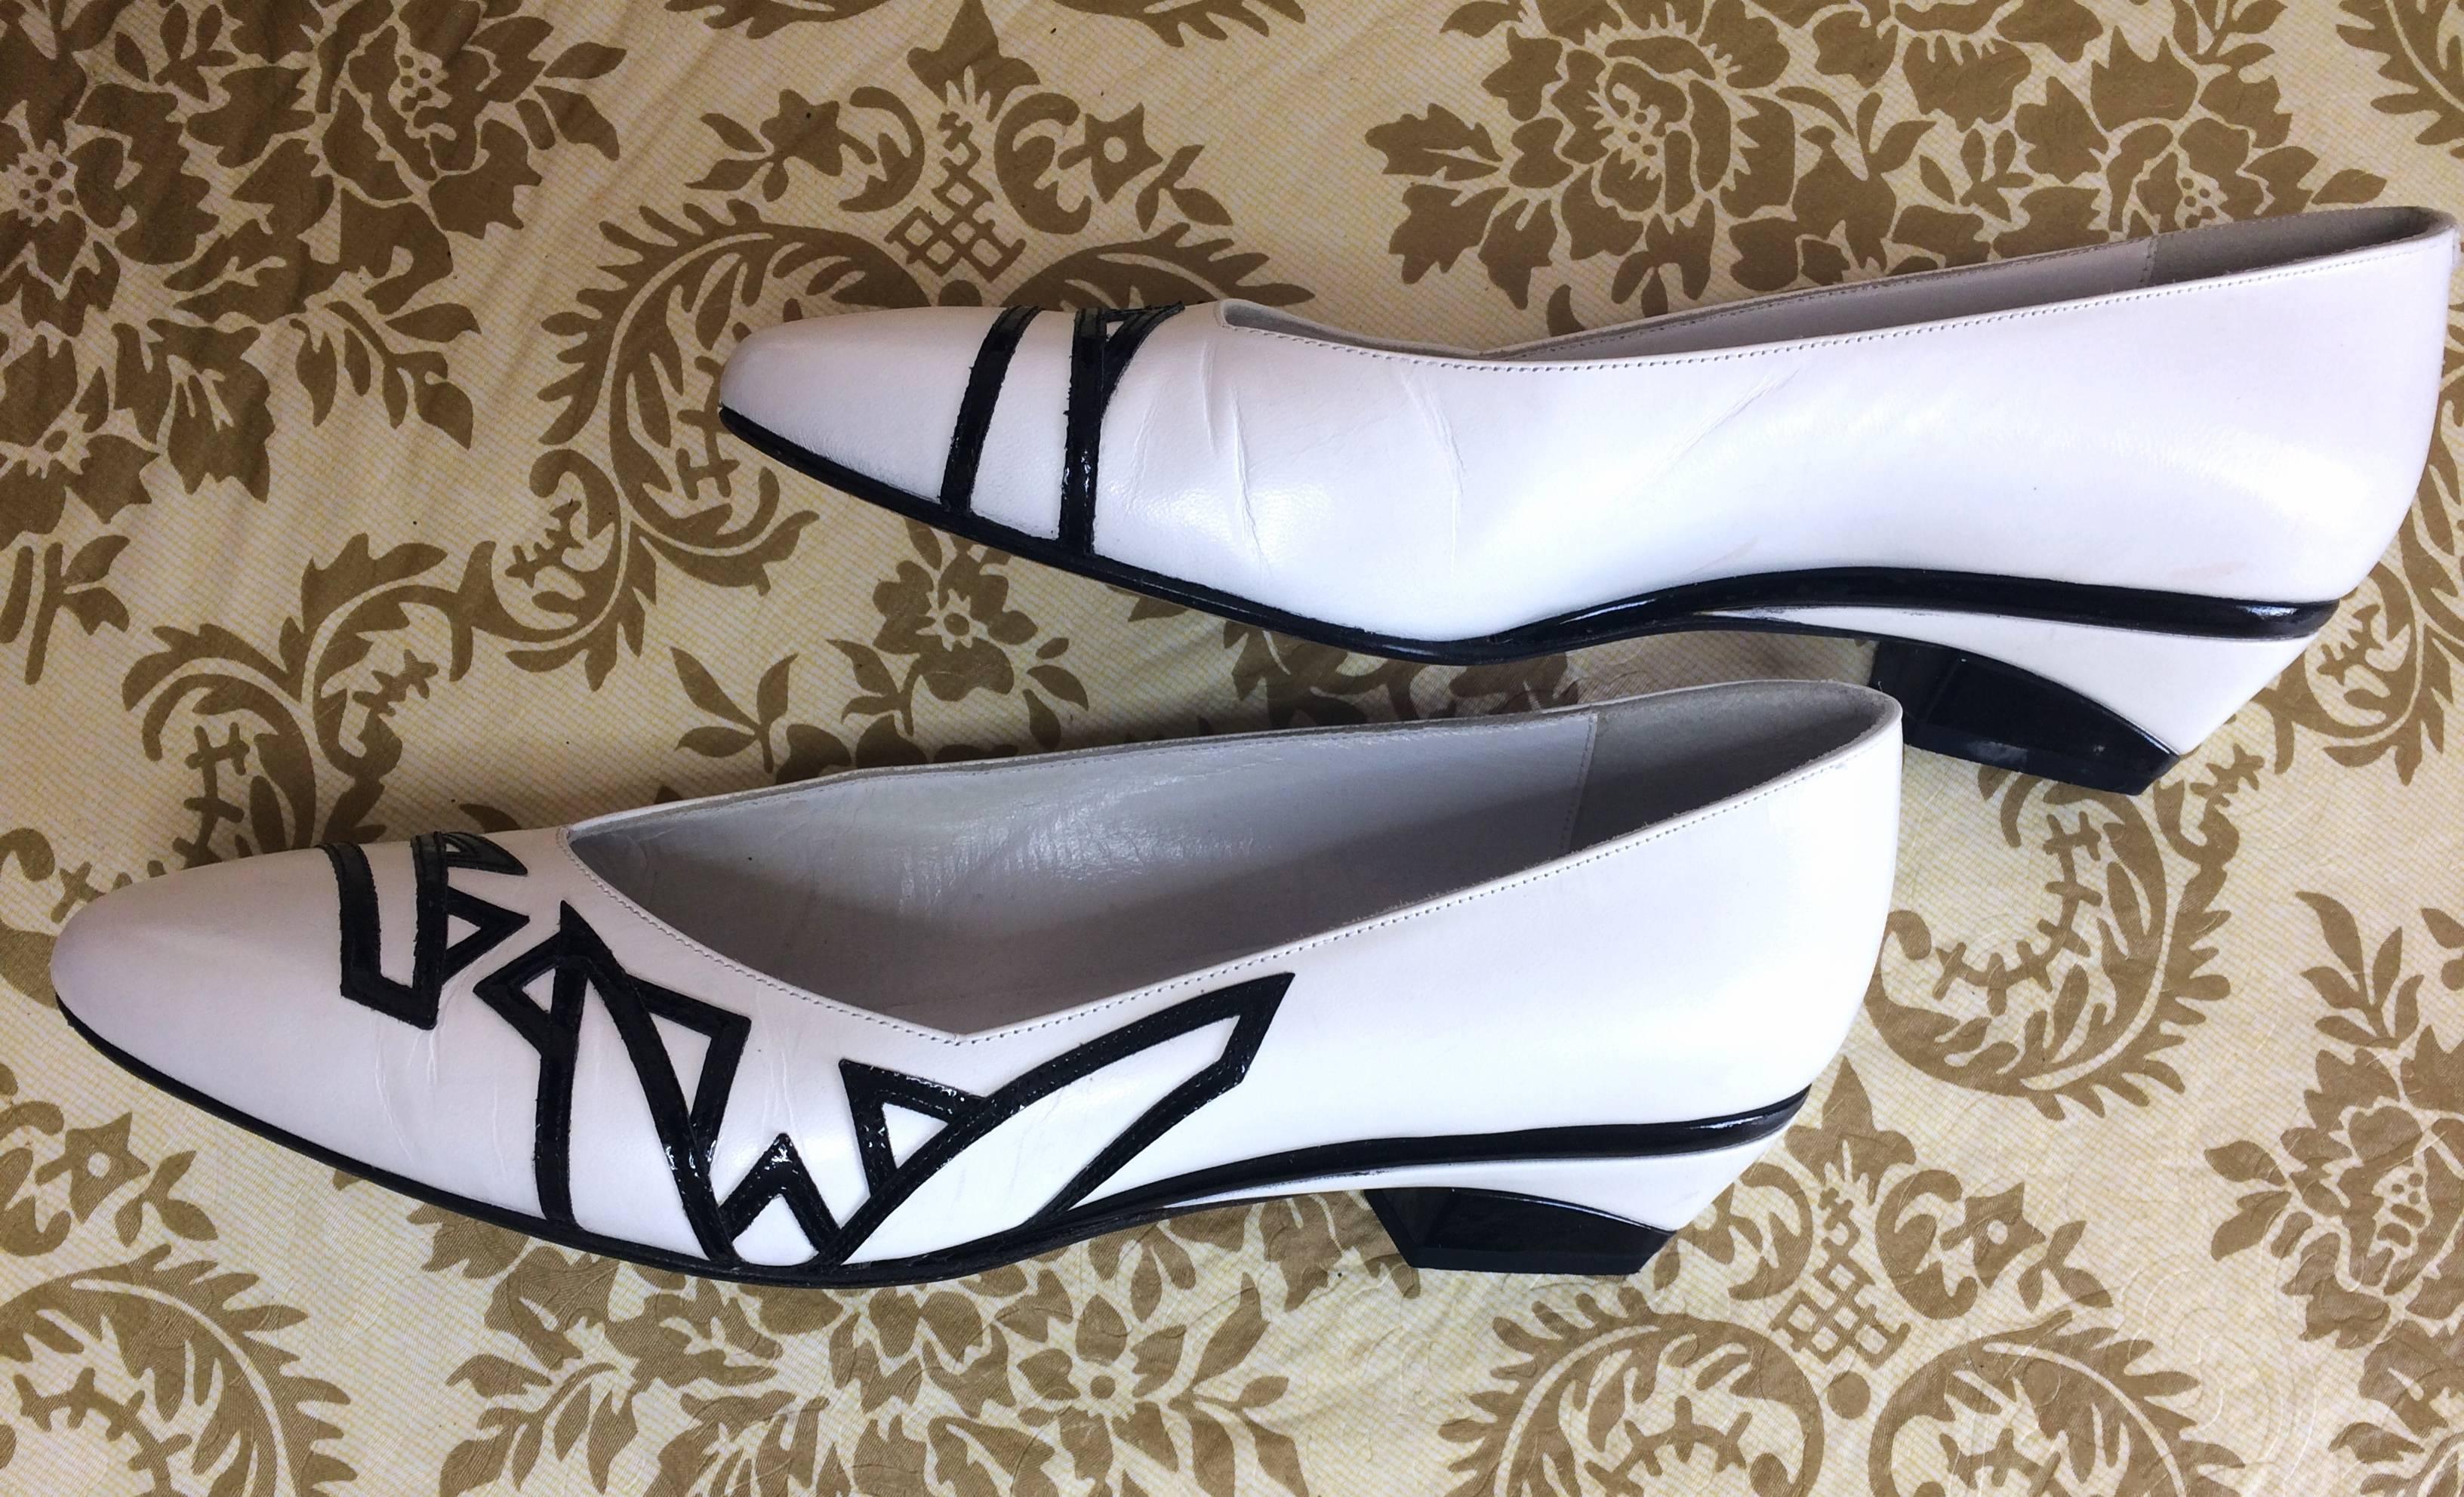 Women's Vintage BALLY white and black leather flat shoes, pumps with geometric design.